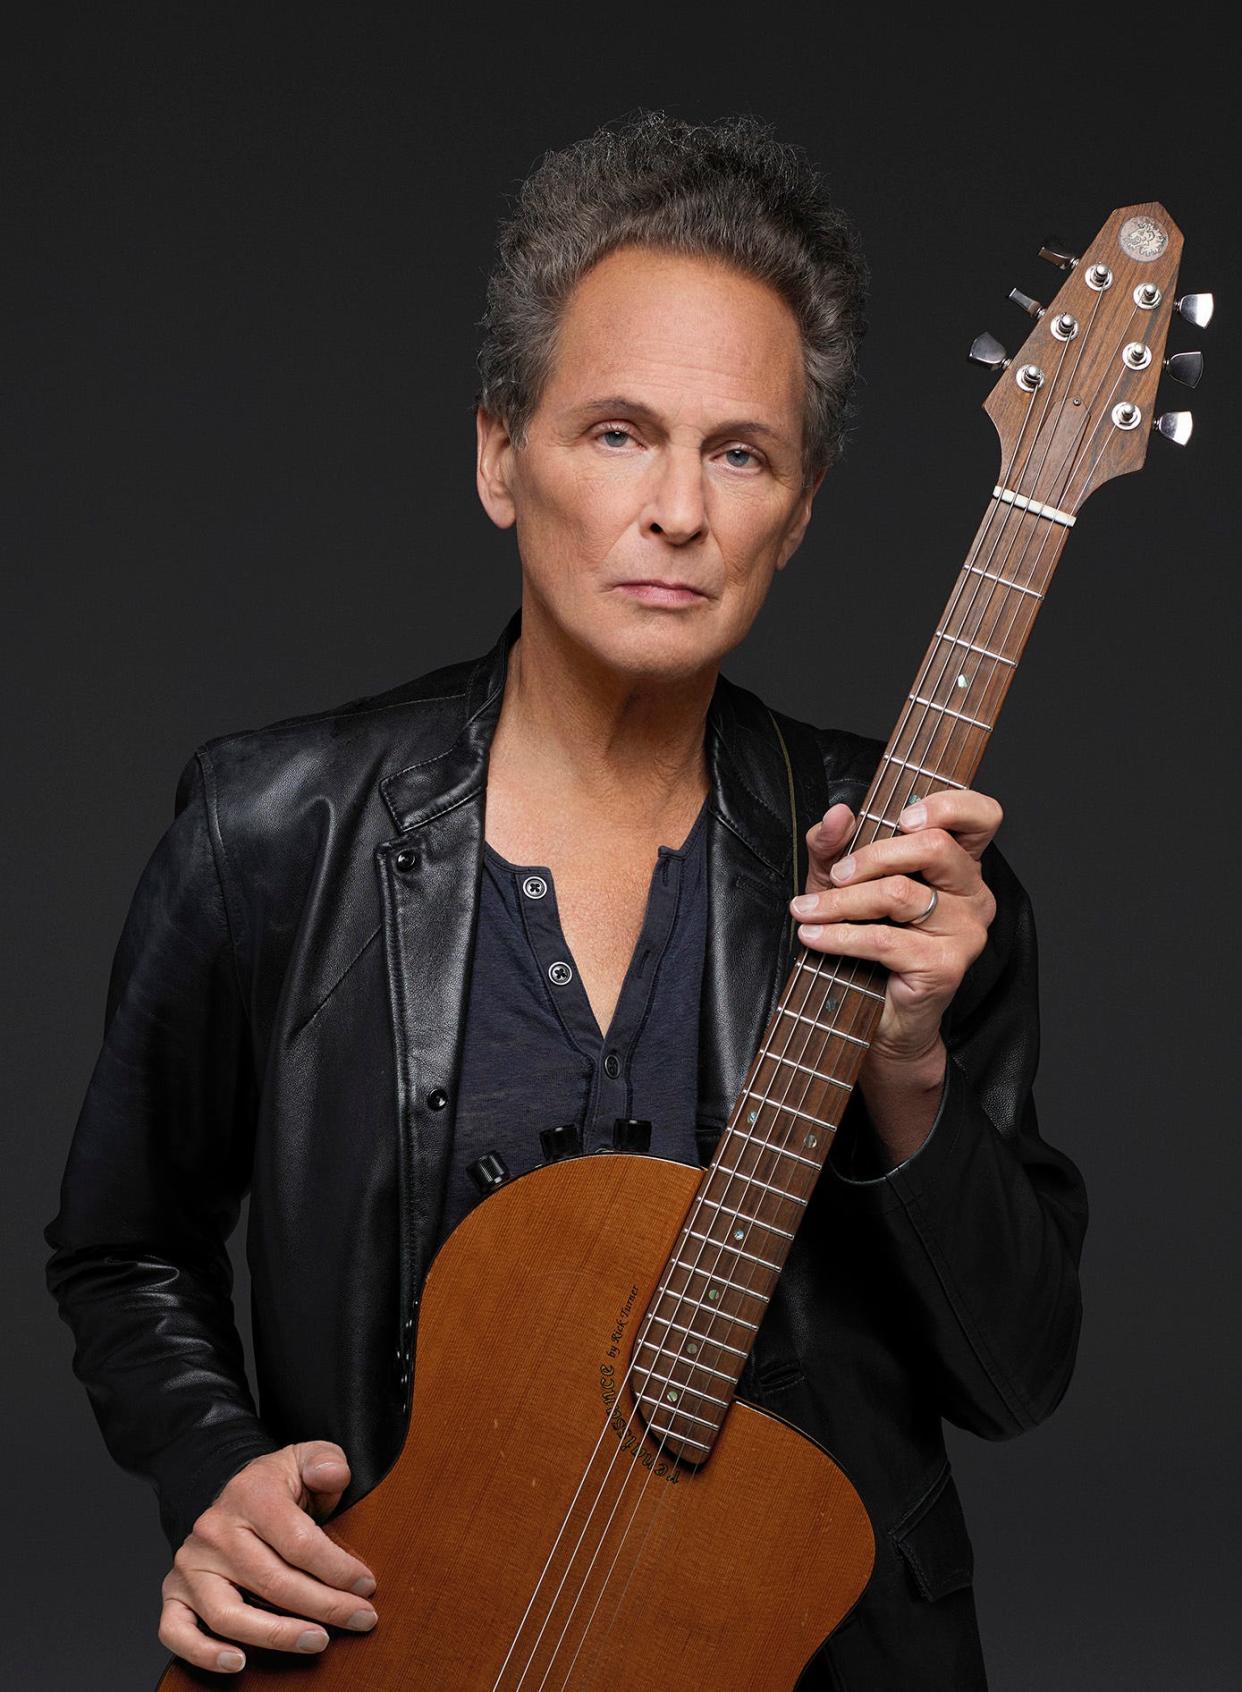 Lindsey Buckingham releases a self-titled solo album Sept. 17.